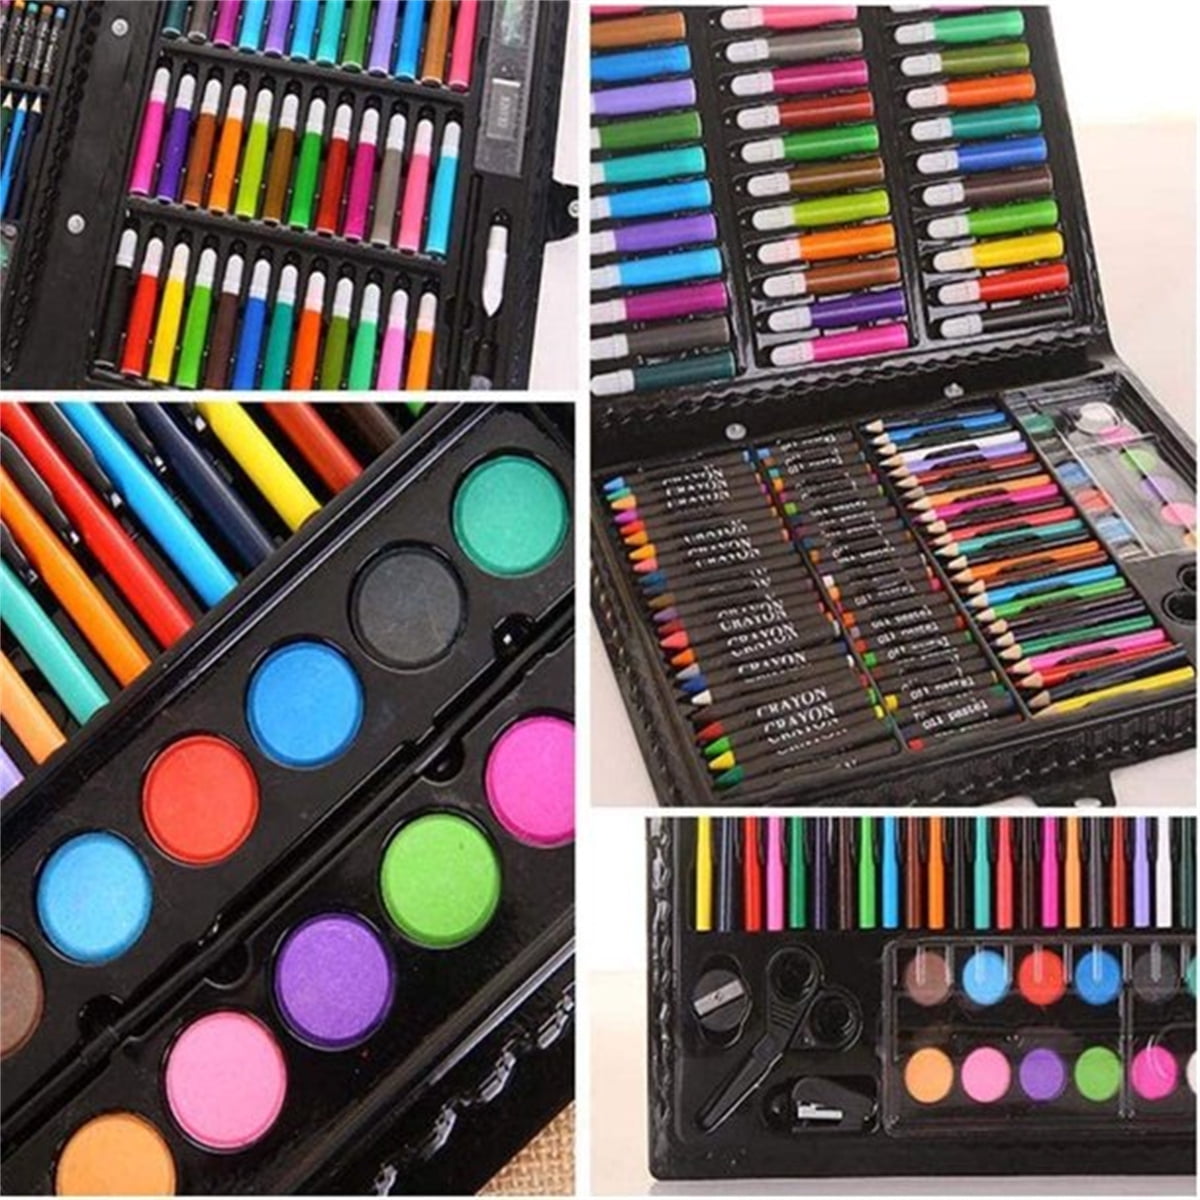 150 Piece Deluxe Art Set, Casewin Art Supplies for Drawing, Painting and  More, Kid Crafting Supplies Great for Teenage 4 5 6 7 8 9 10 11 12 13 Years  